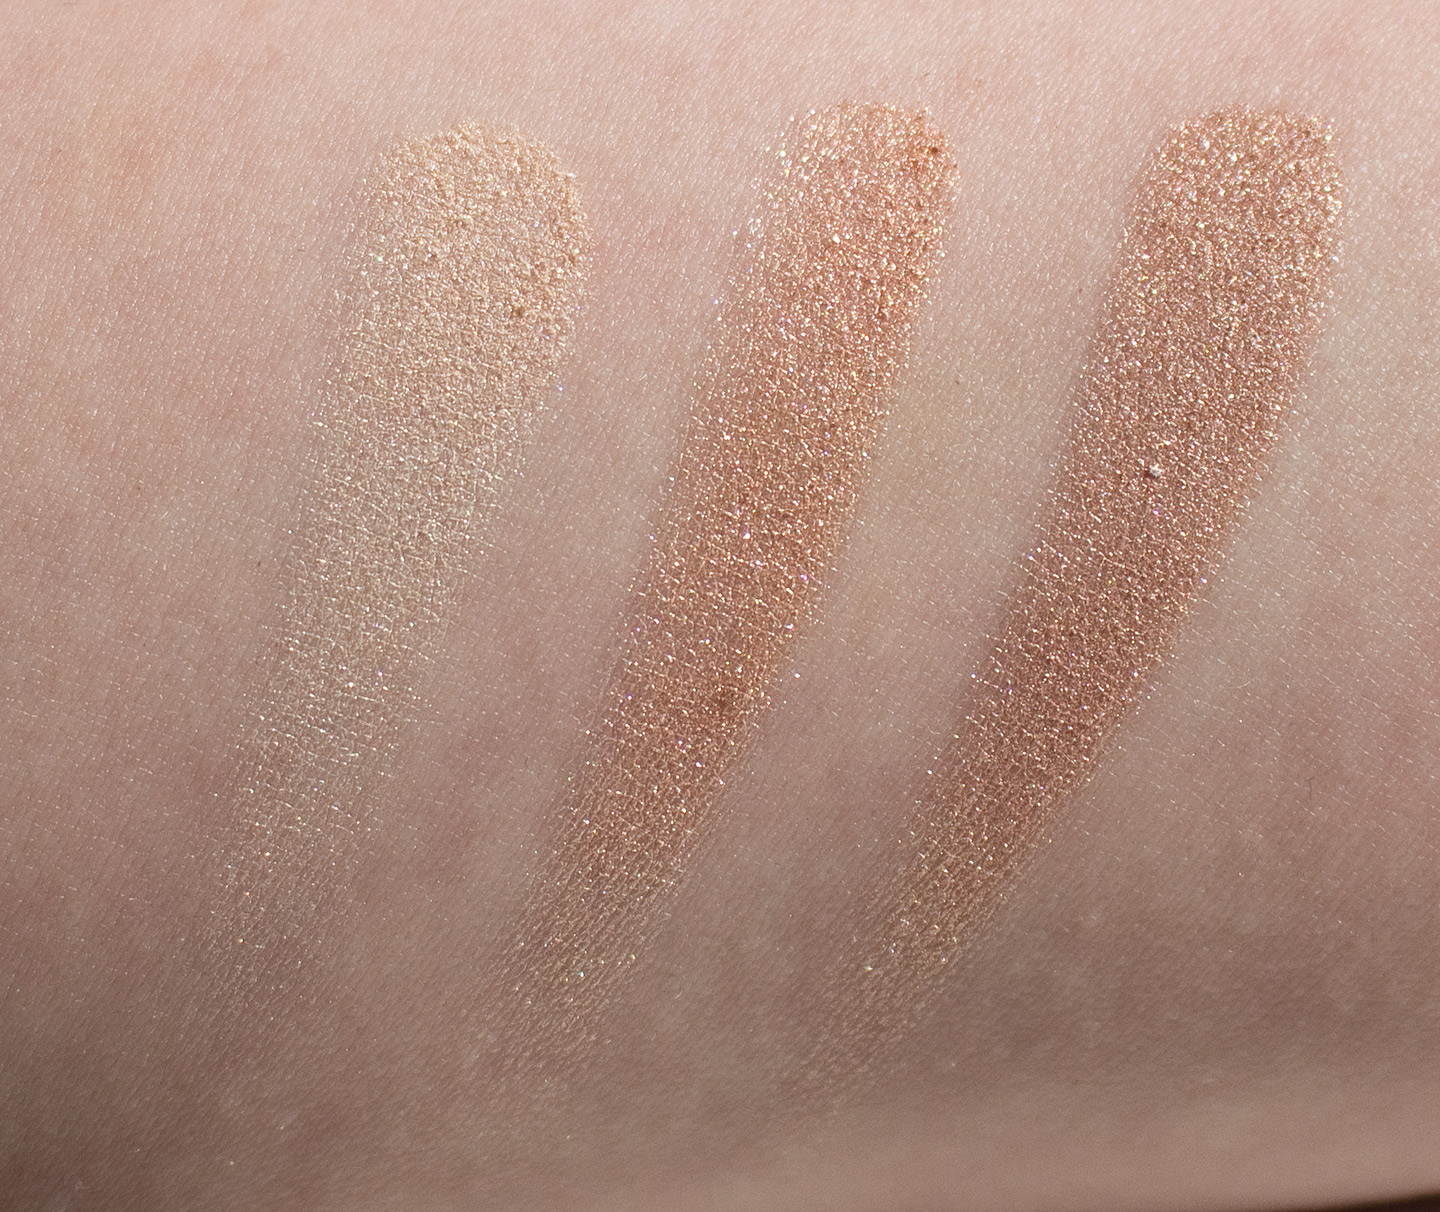 WARPAINT and BECCA Skin Perfector in Champagne Pop : Swatches & Review